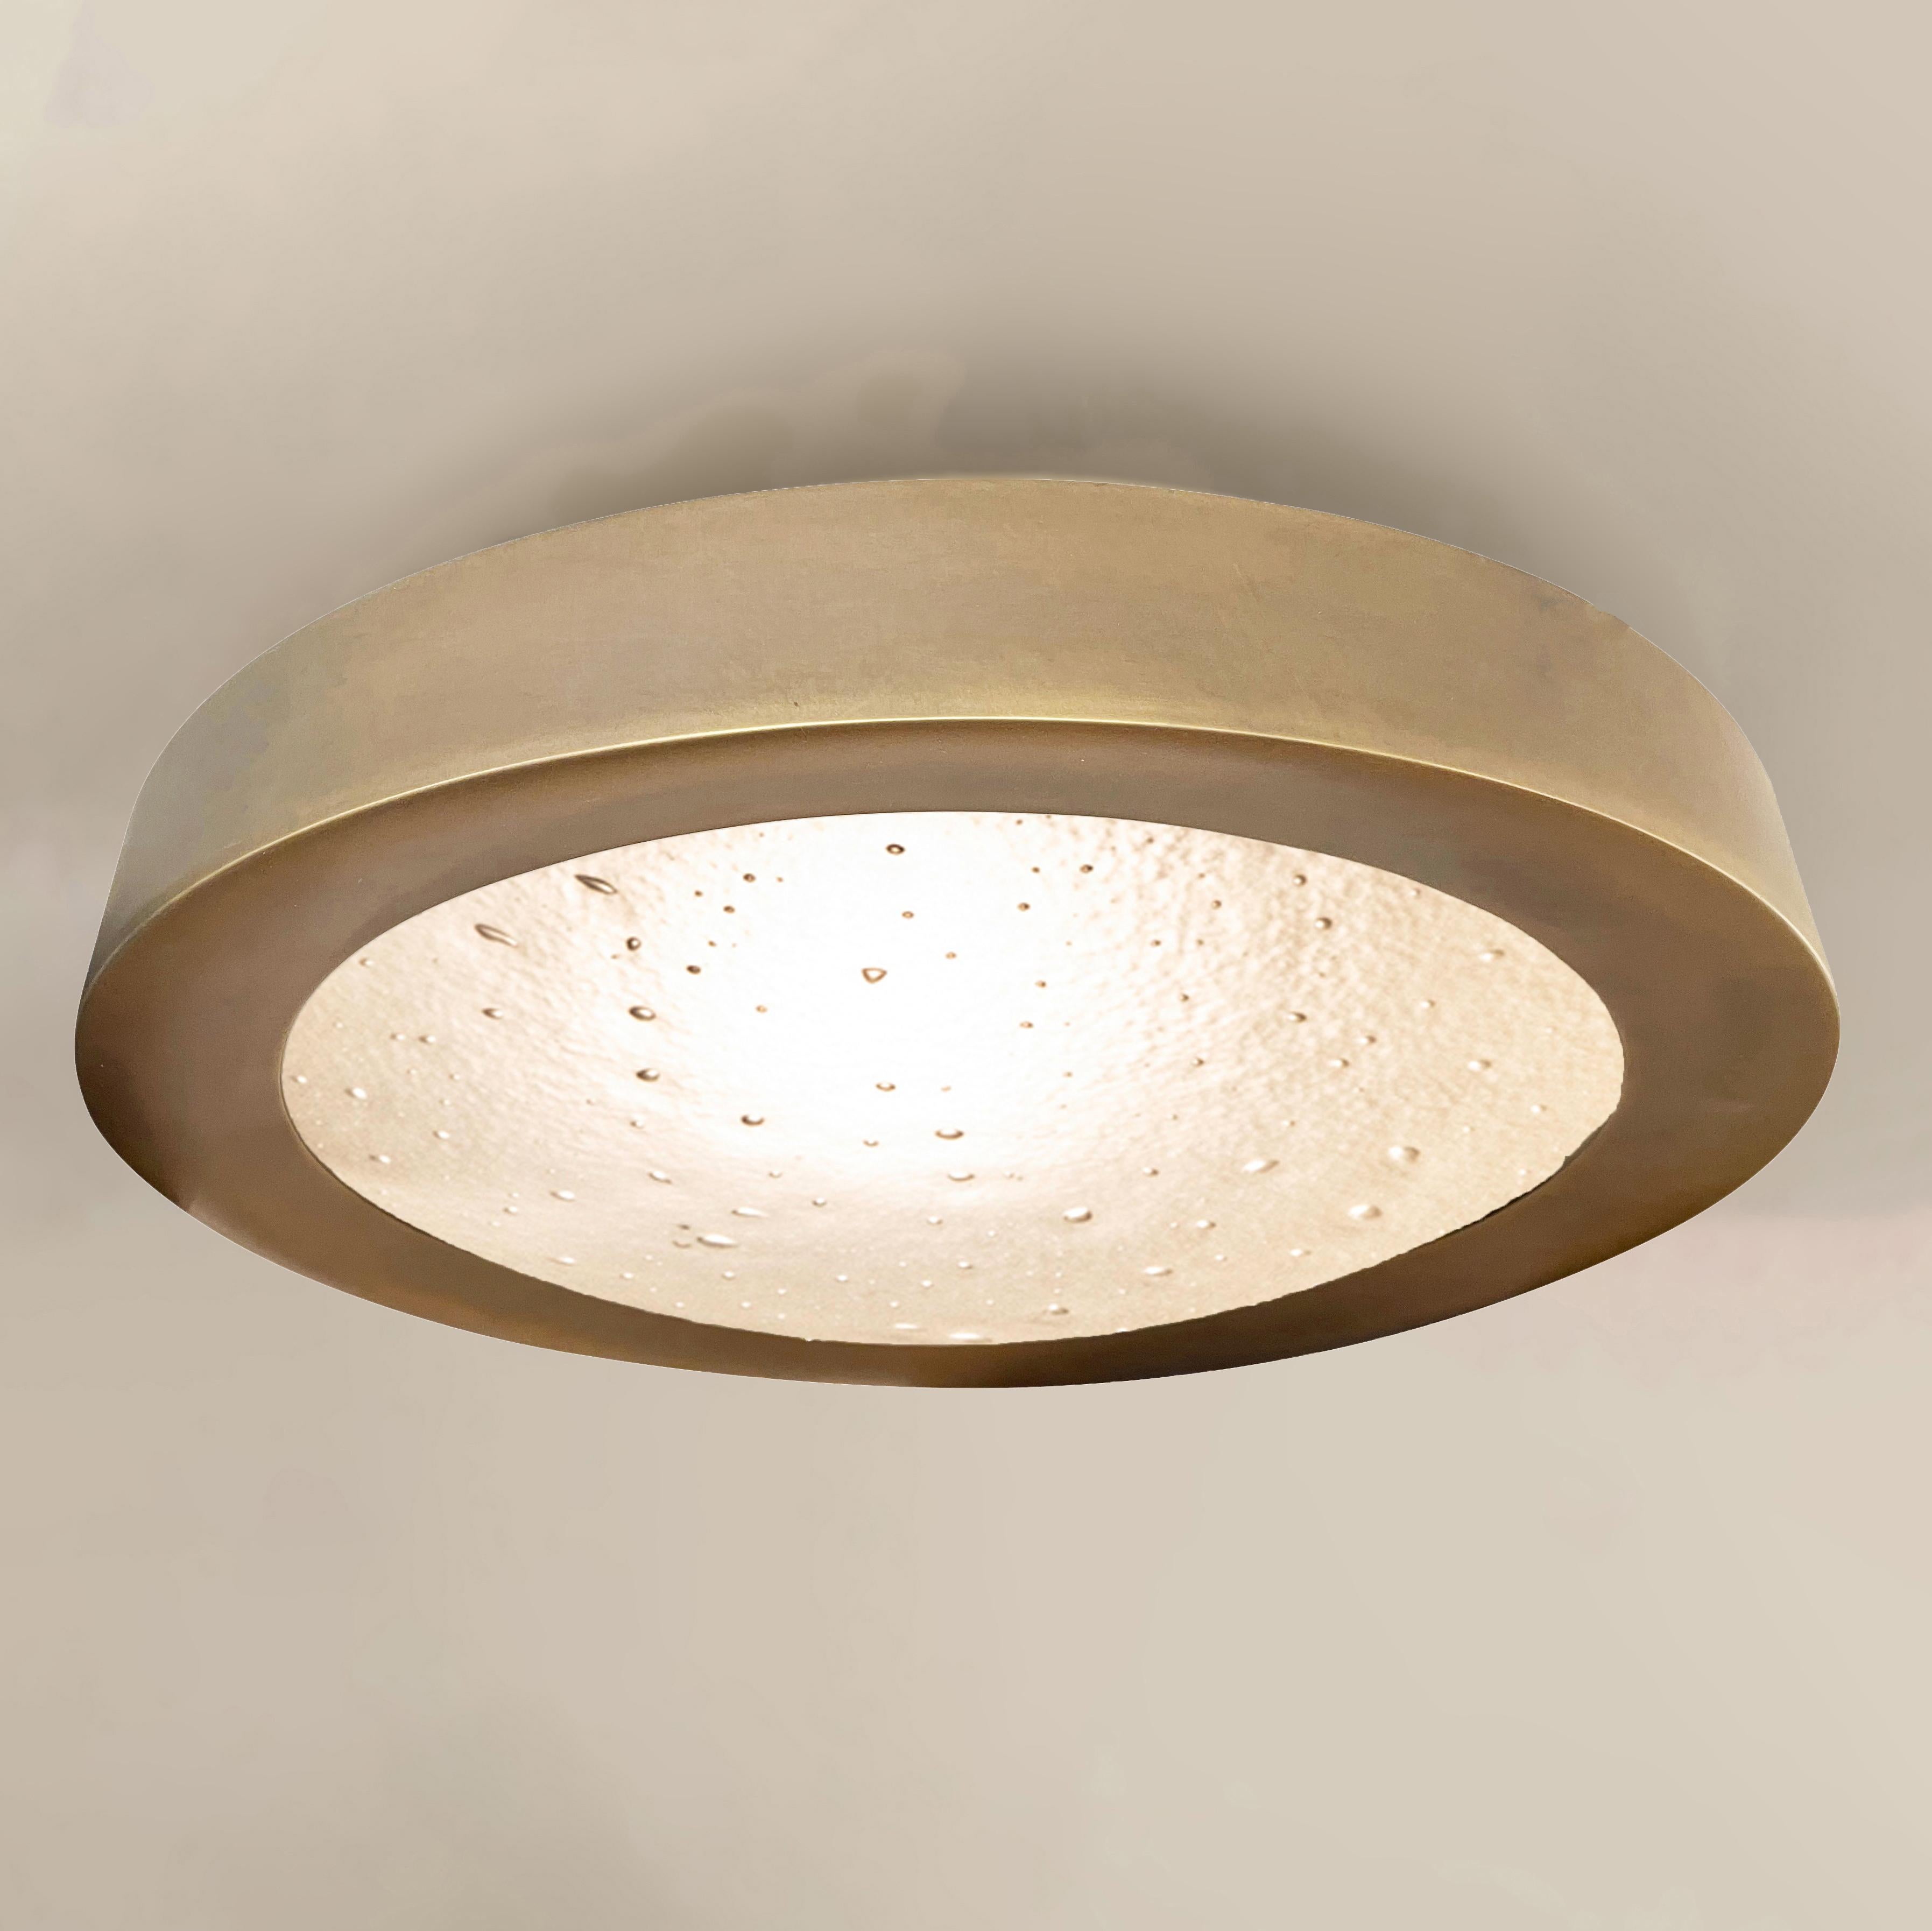 The Tondo Grande flush mount was designed to elavate smaller and low clearance spaces with its 4” drop. The concave bevel holding the convex Murano glass shade and its offset stance make it a highly sculptural piece despite its size. Shown in our